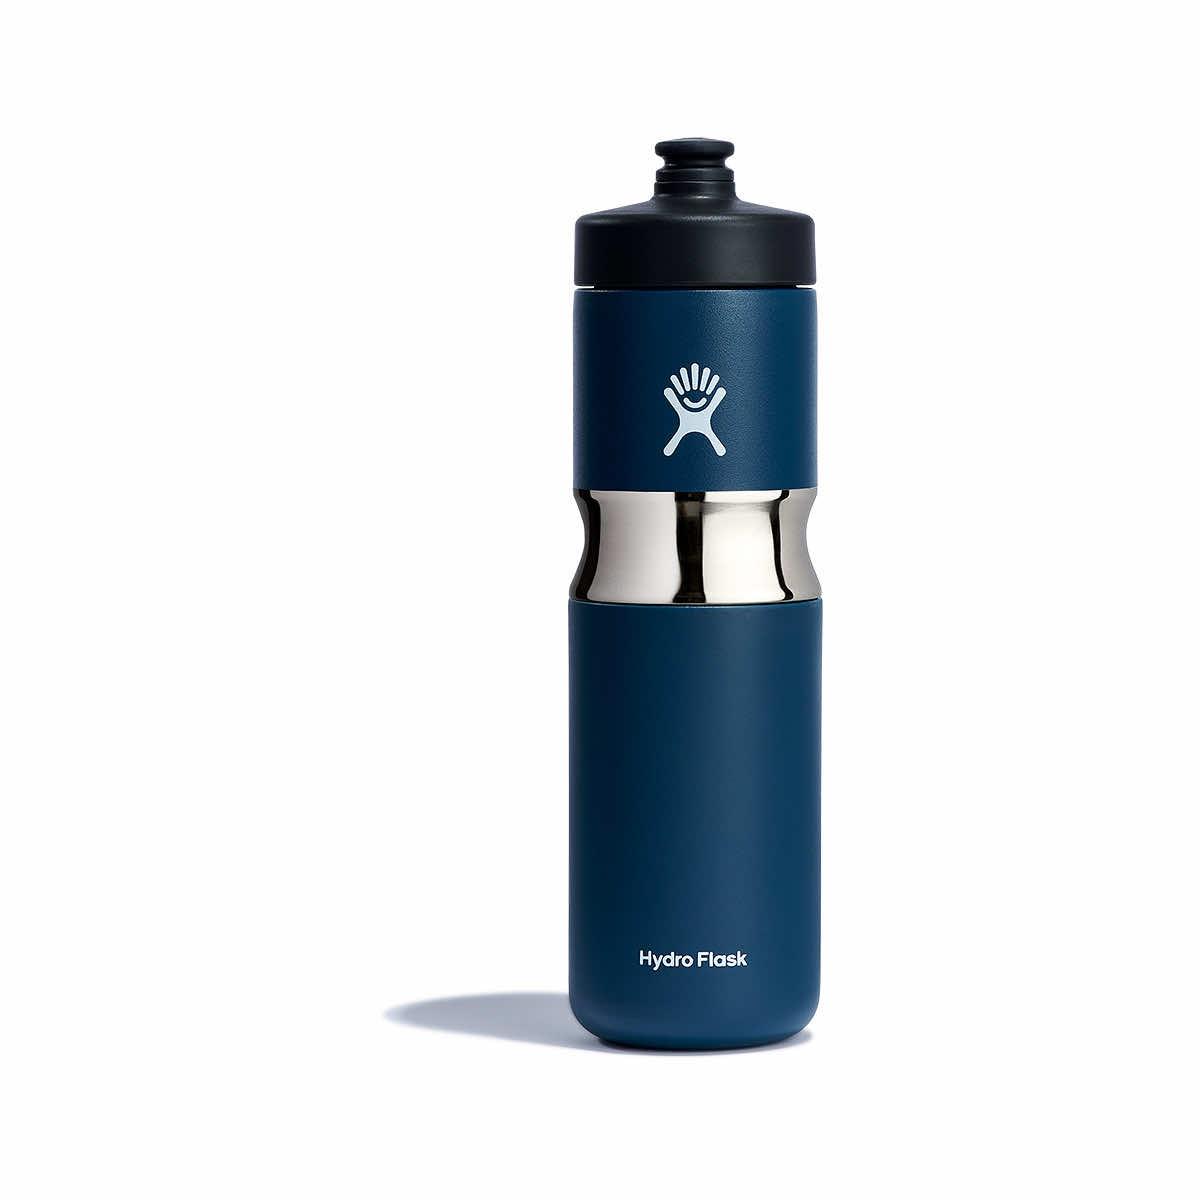 Hydro Flask Vintage & Collectibles